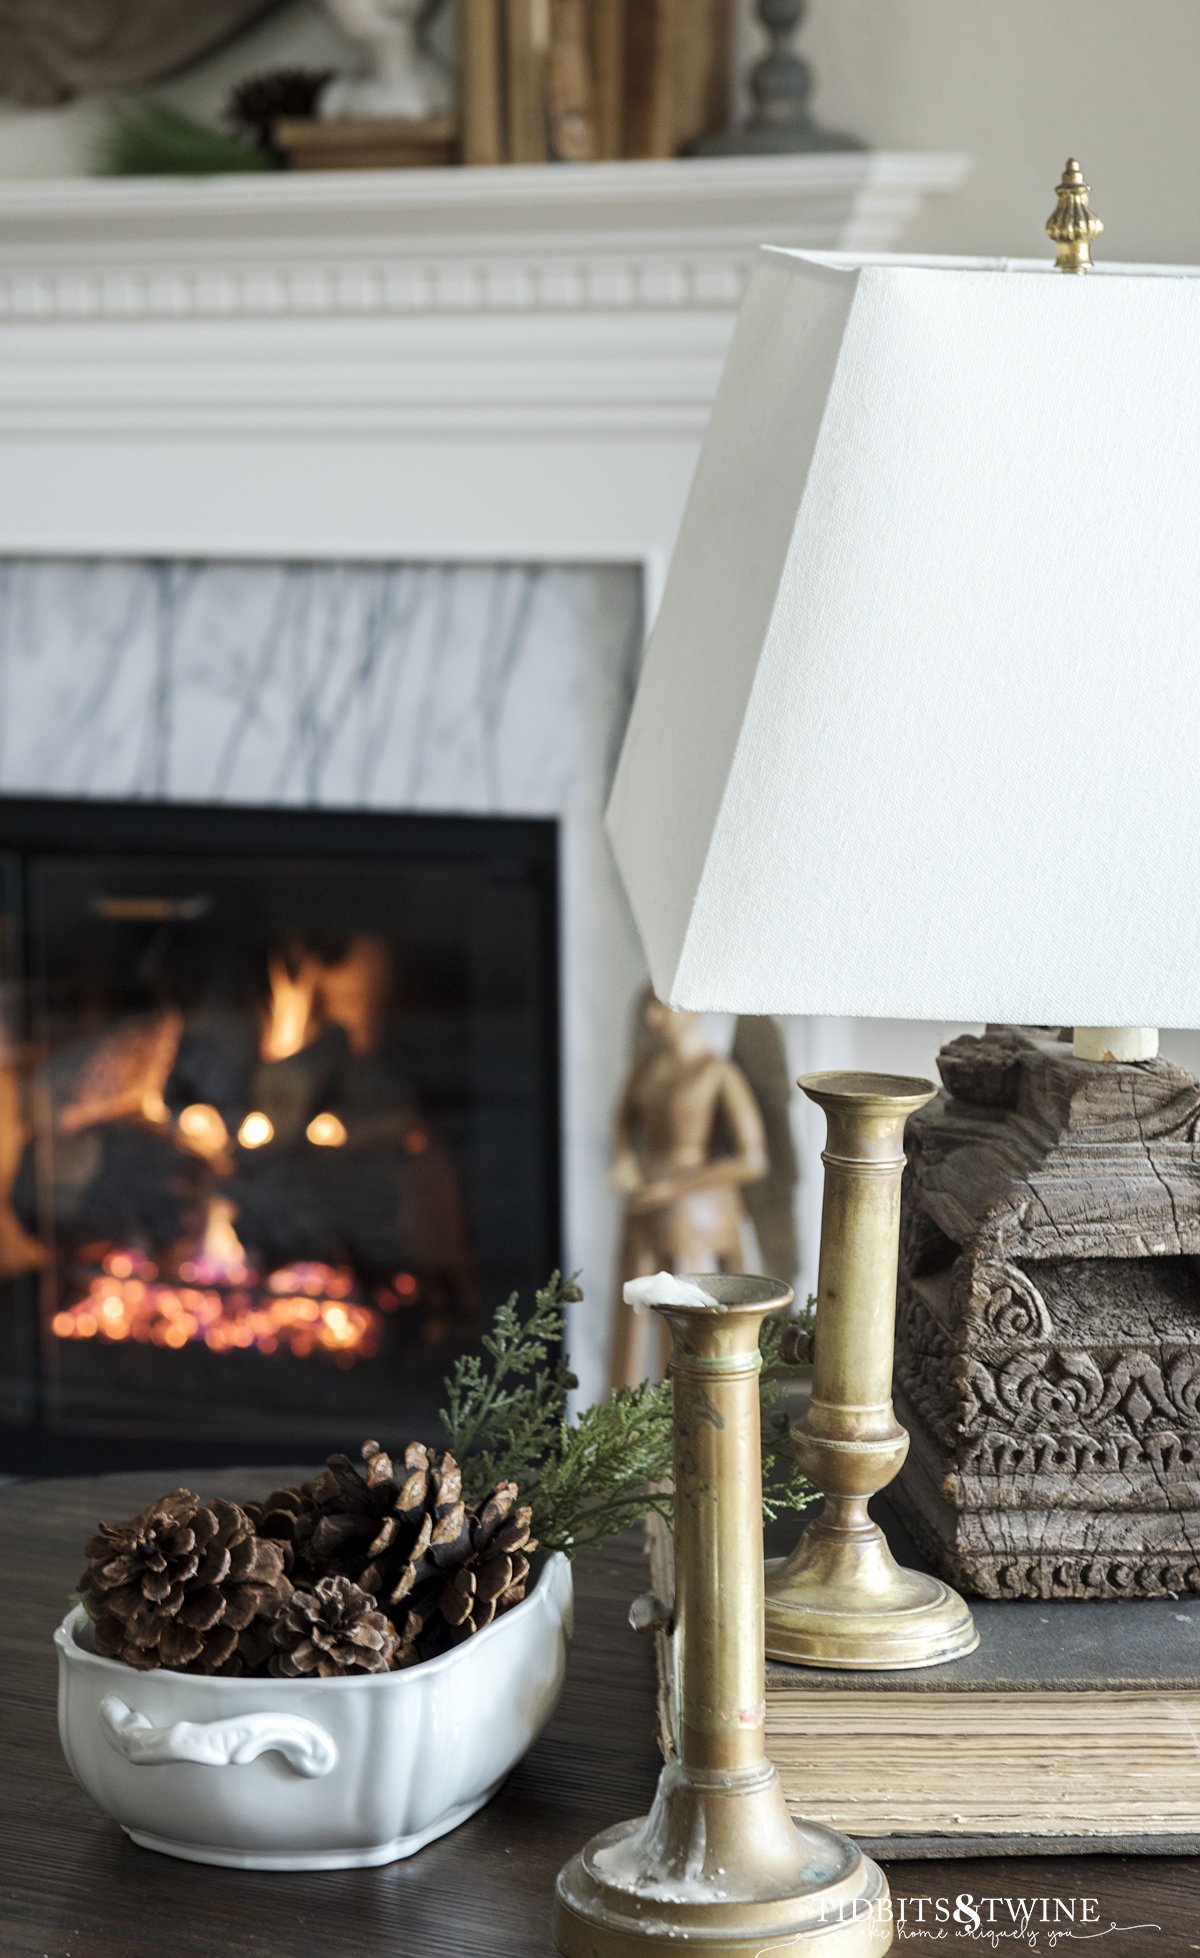 How to Decorate with Winter Decor (Not Christmas)